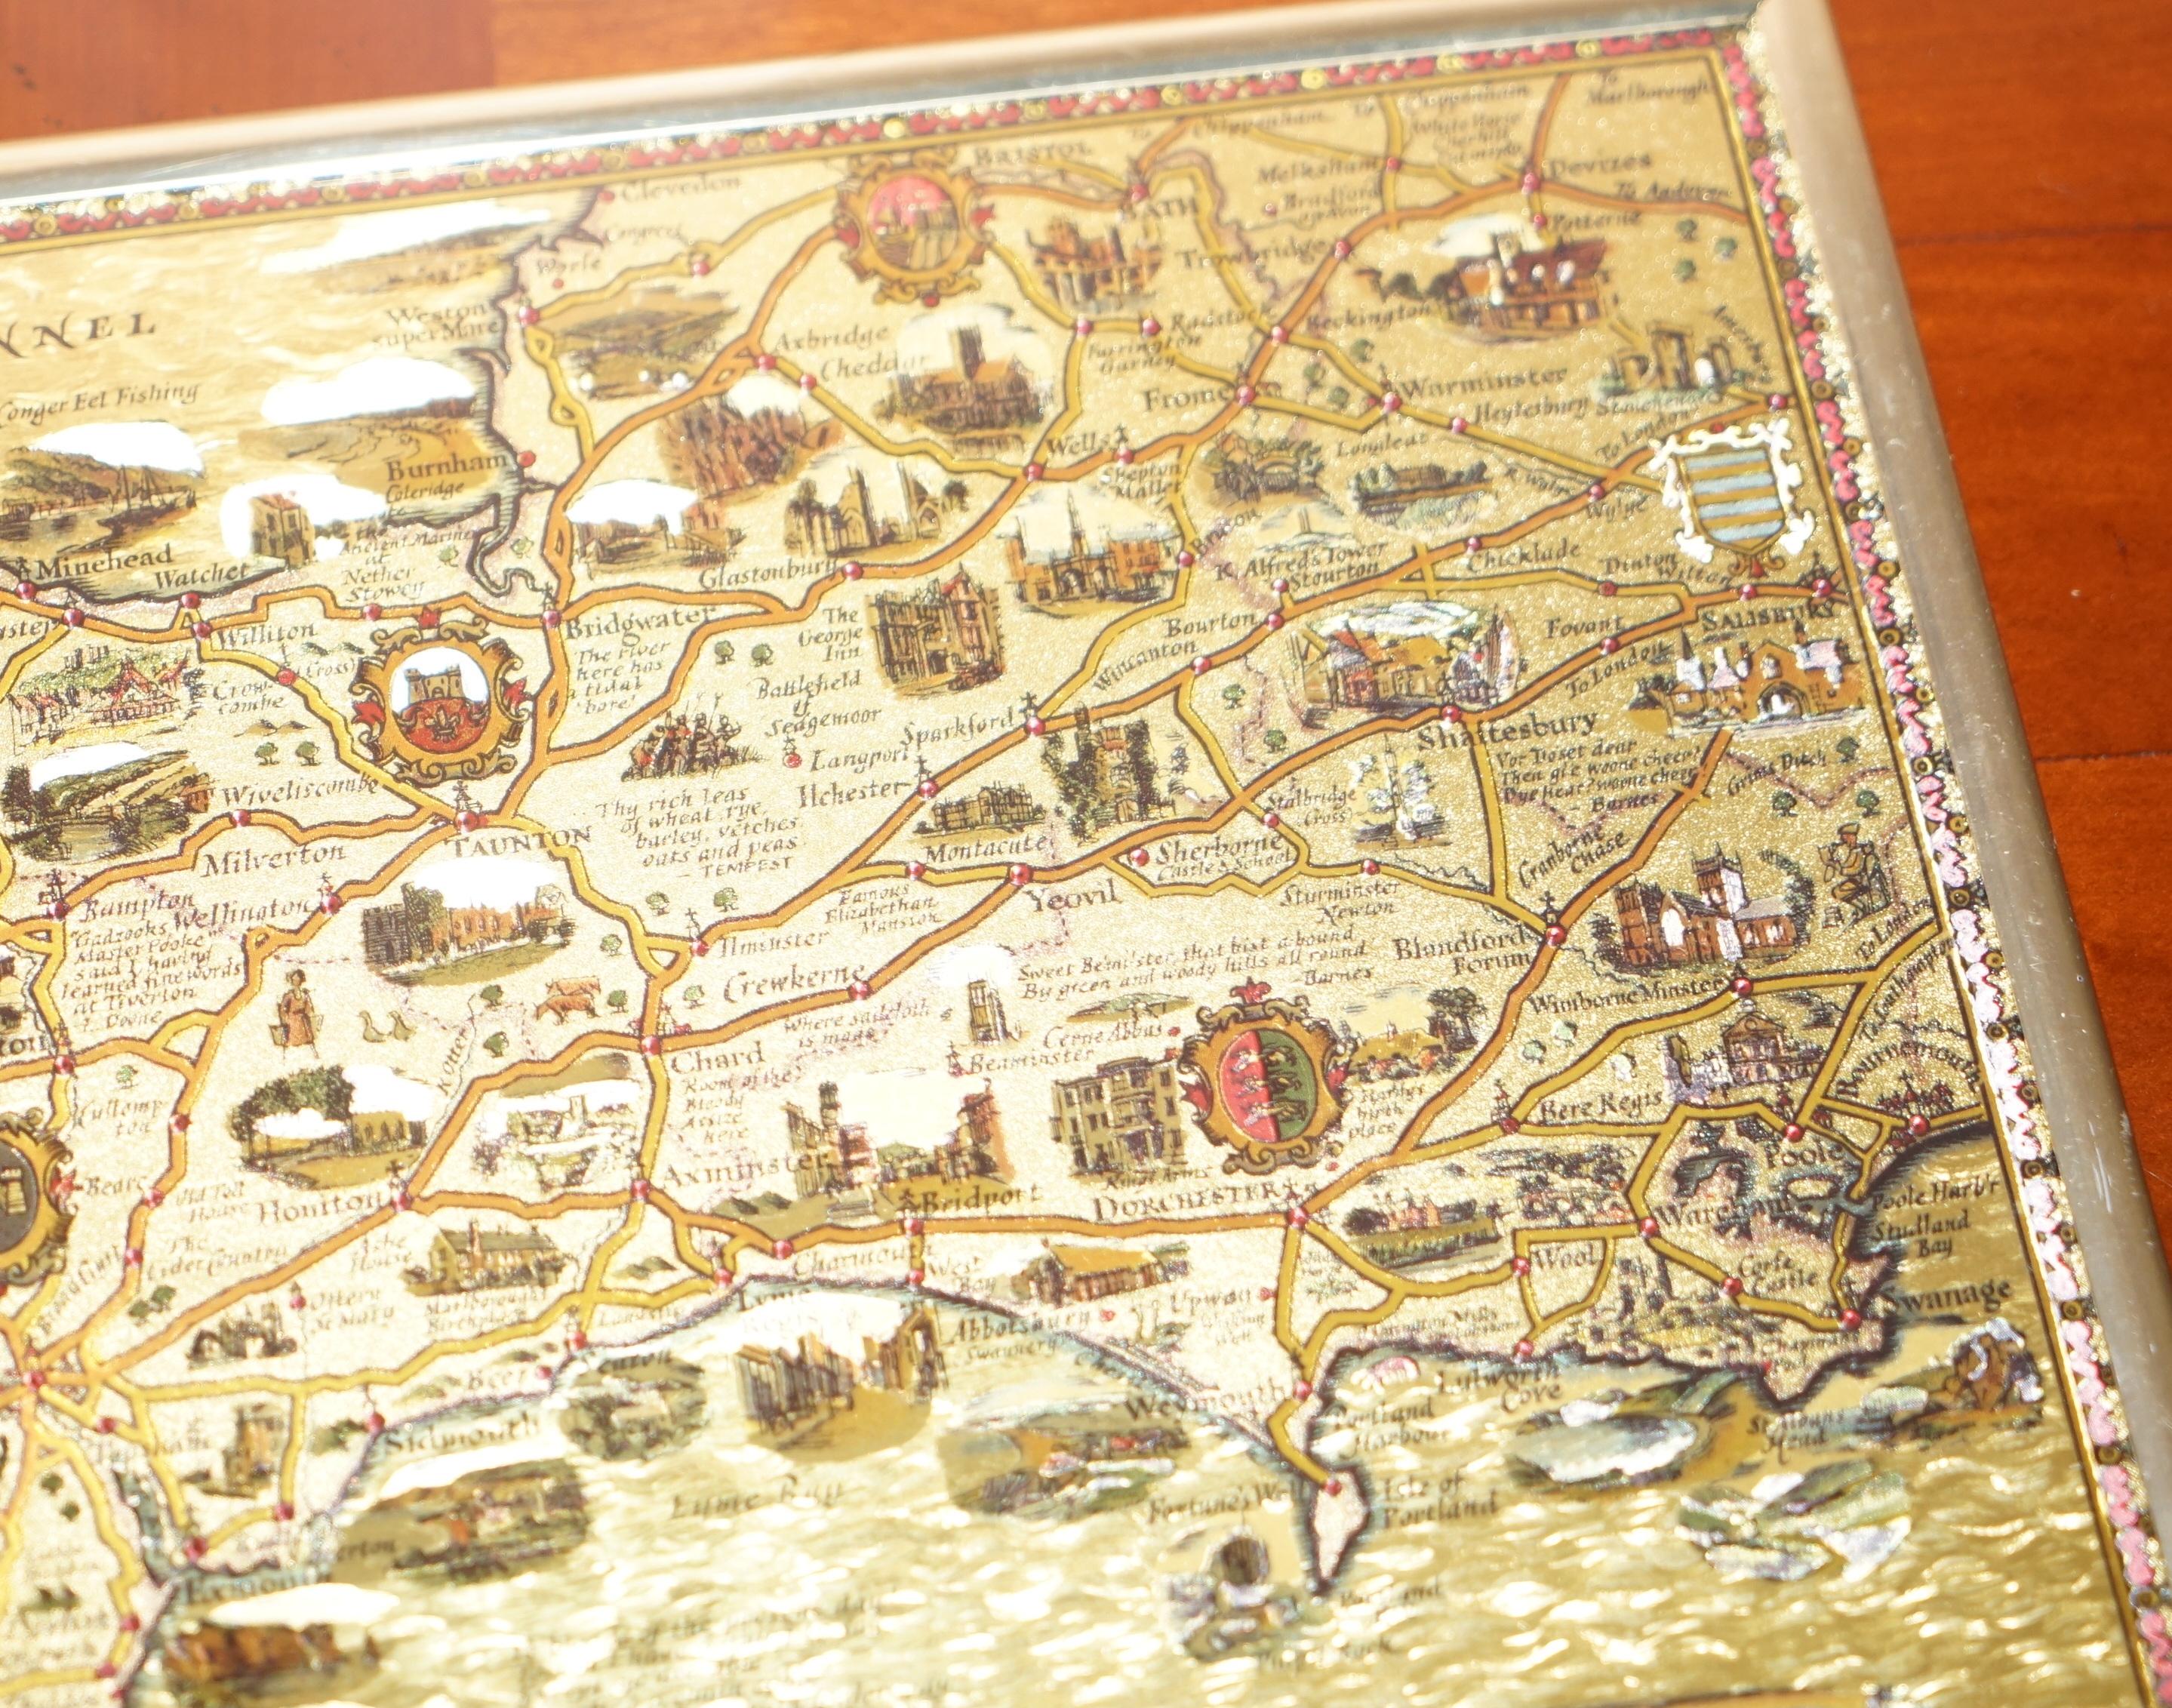 Gold Leaf Foil Pictorial Plan Map of the West Country of England Antique Style For Sale 1